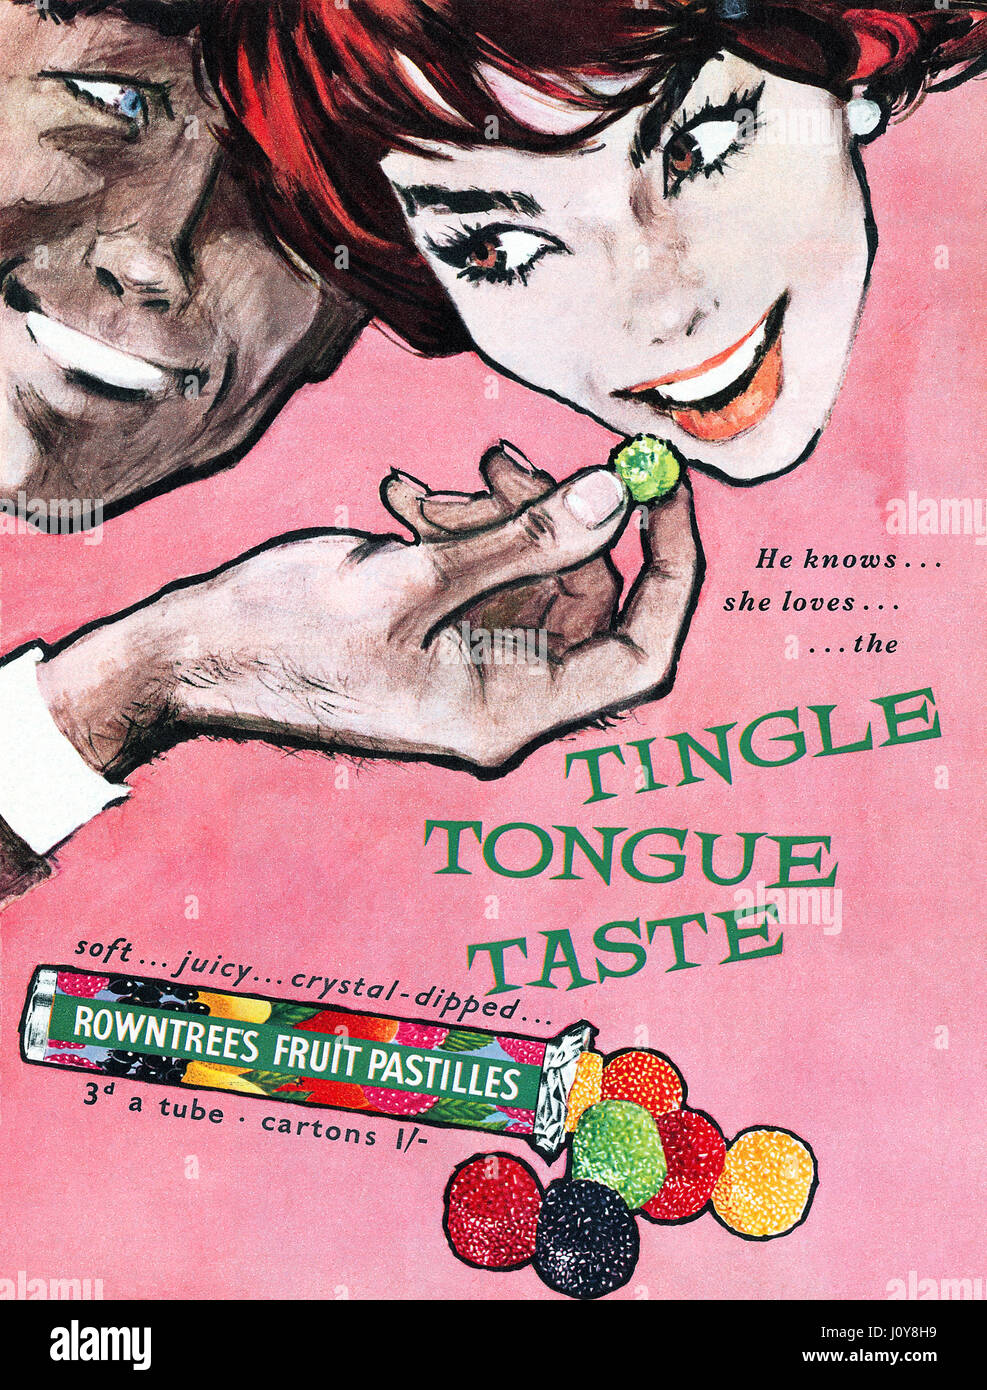 1959 British advertisement for Rowntree's Fruit Pastilles. Stock Photo